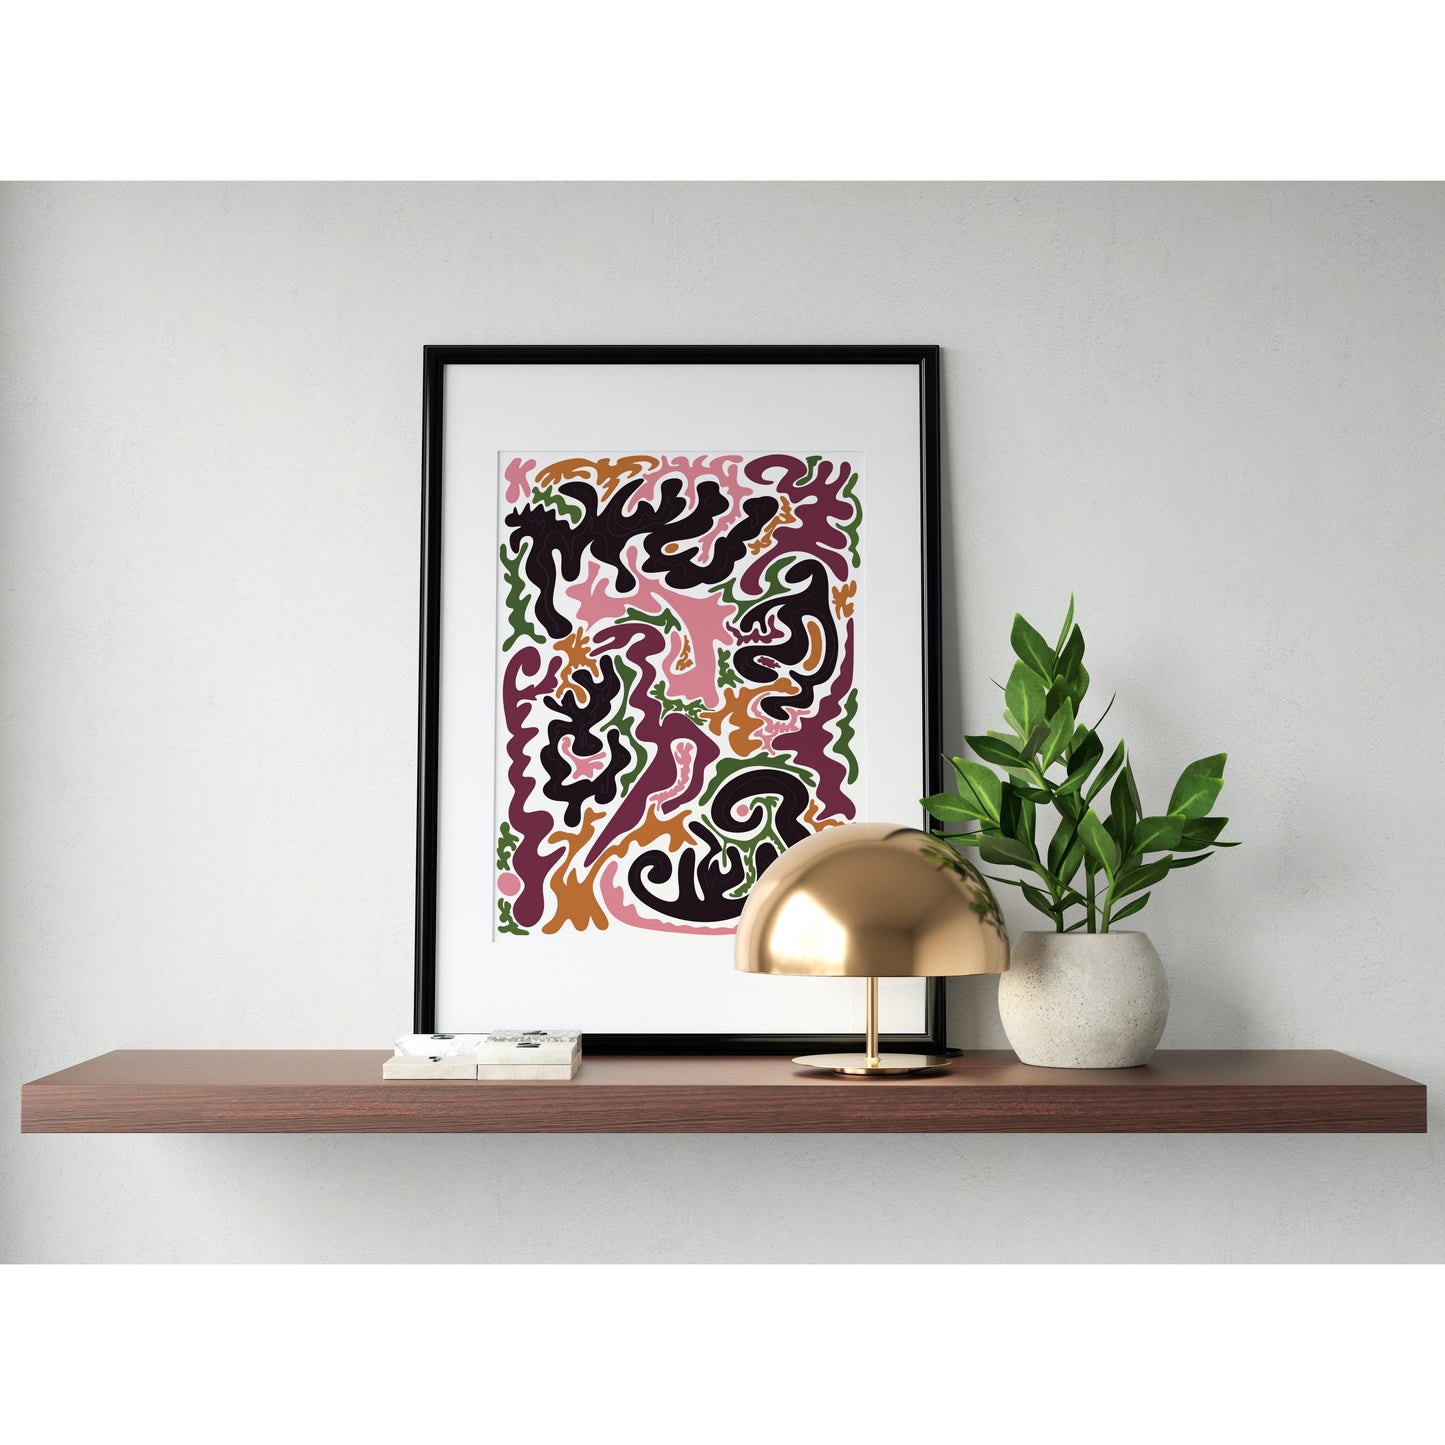 This unique abstract art print is just the thing to add a touch of warmth and personality to your home this autumn. Featuring rich, warm colours, it's sure to become a standout piece in your home décor.